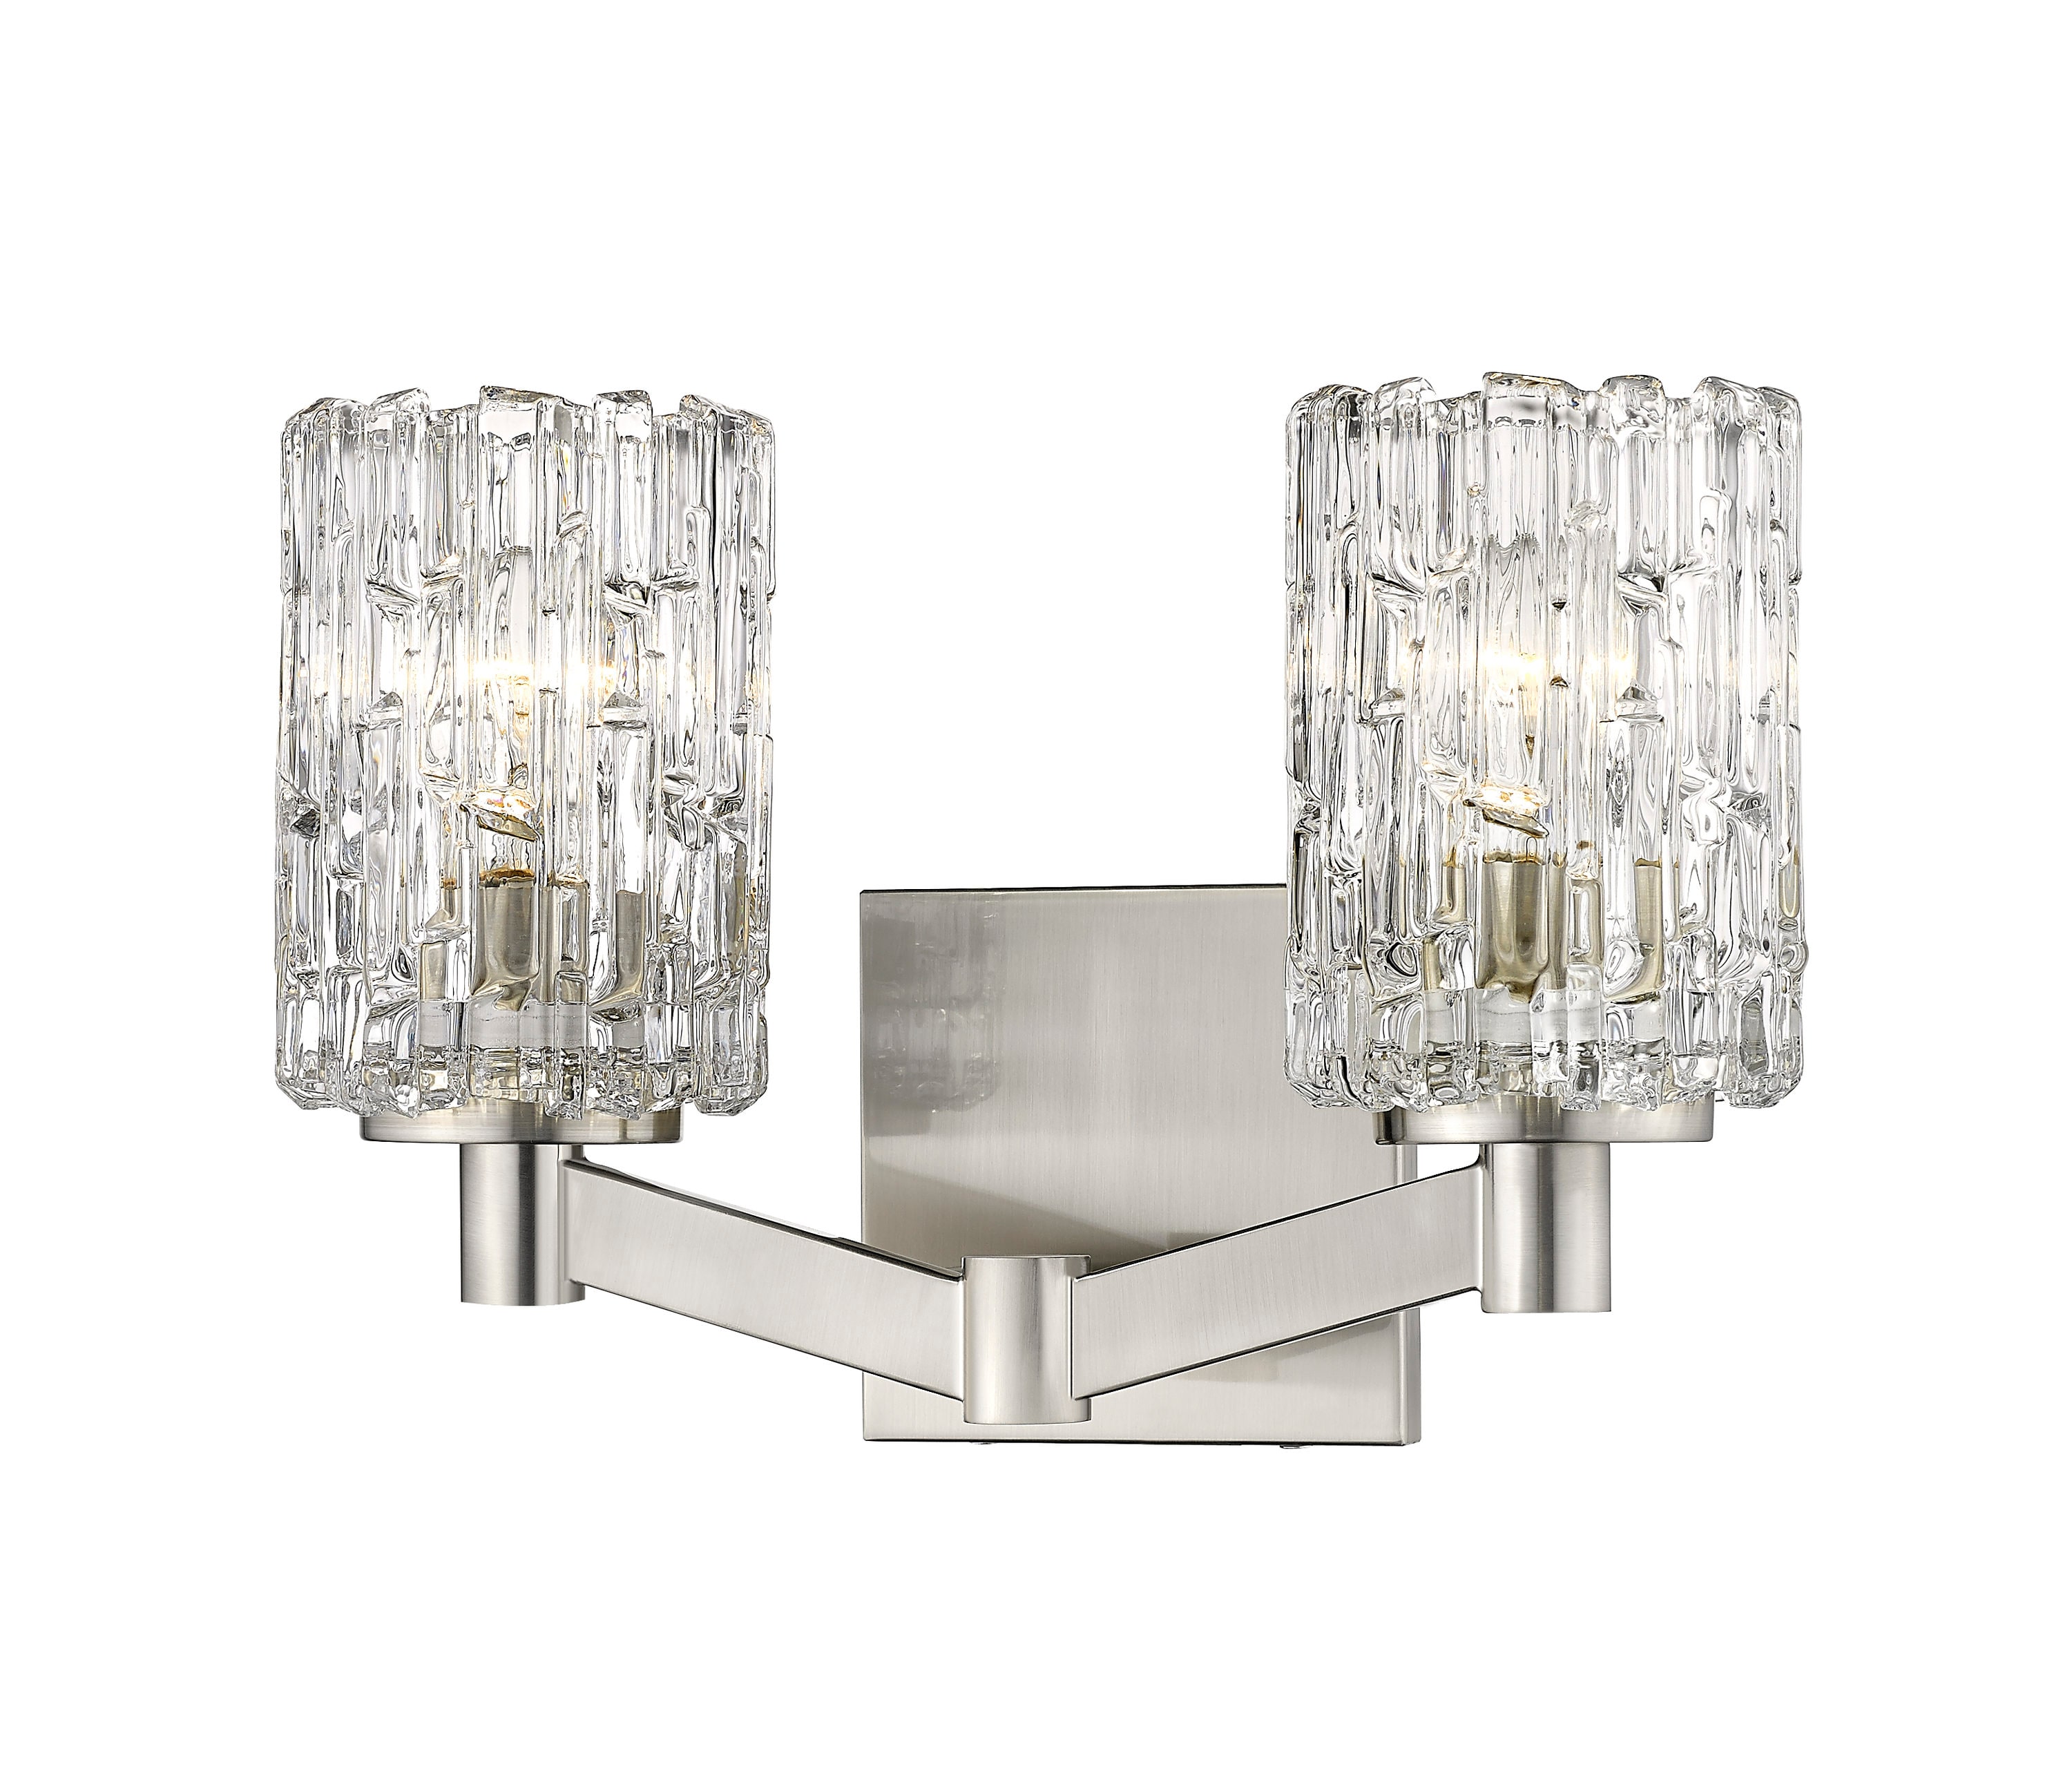 Aspen Creative 62057 2-Light Brushed Nickel Vanity Light with Clear Glass Shade 